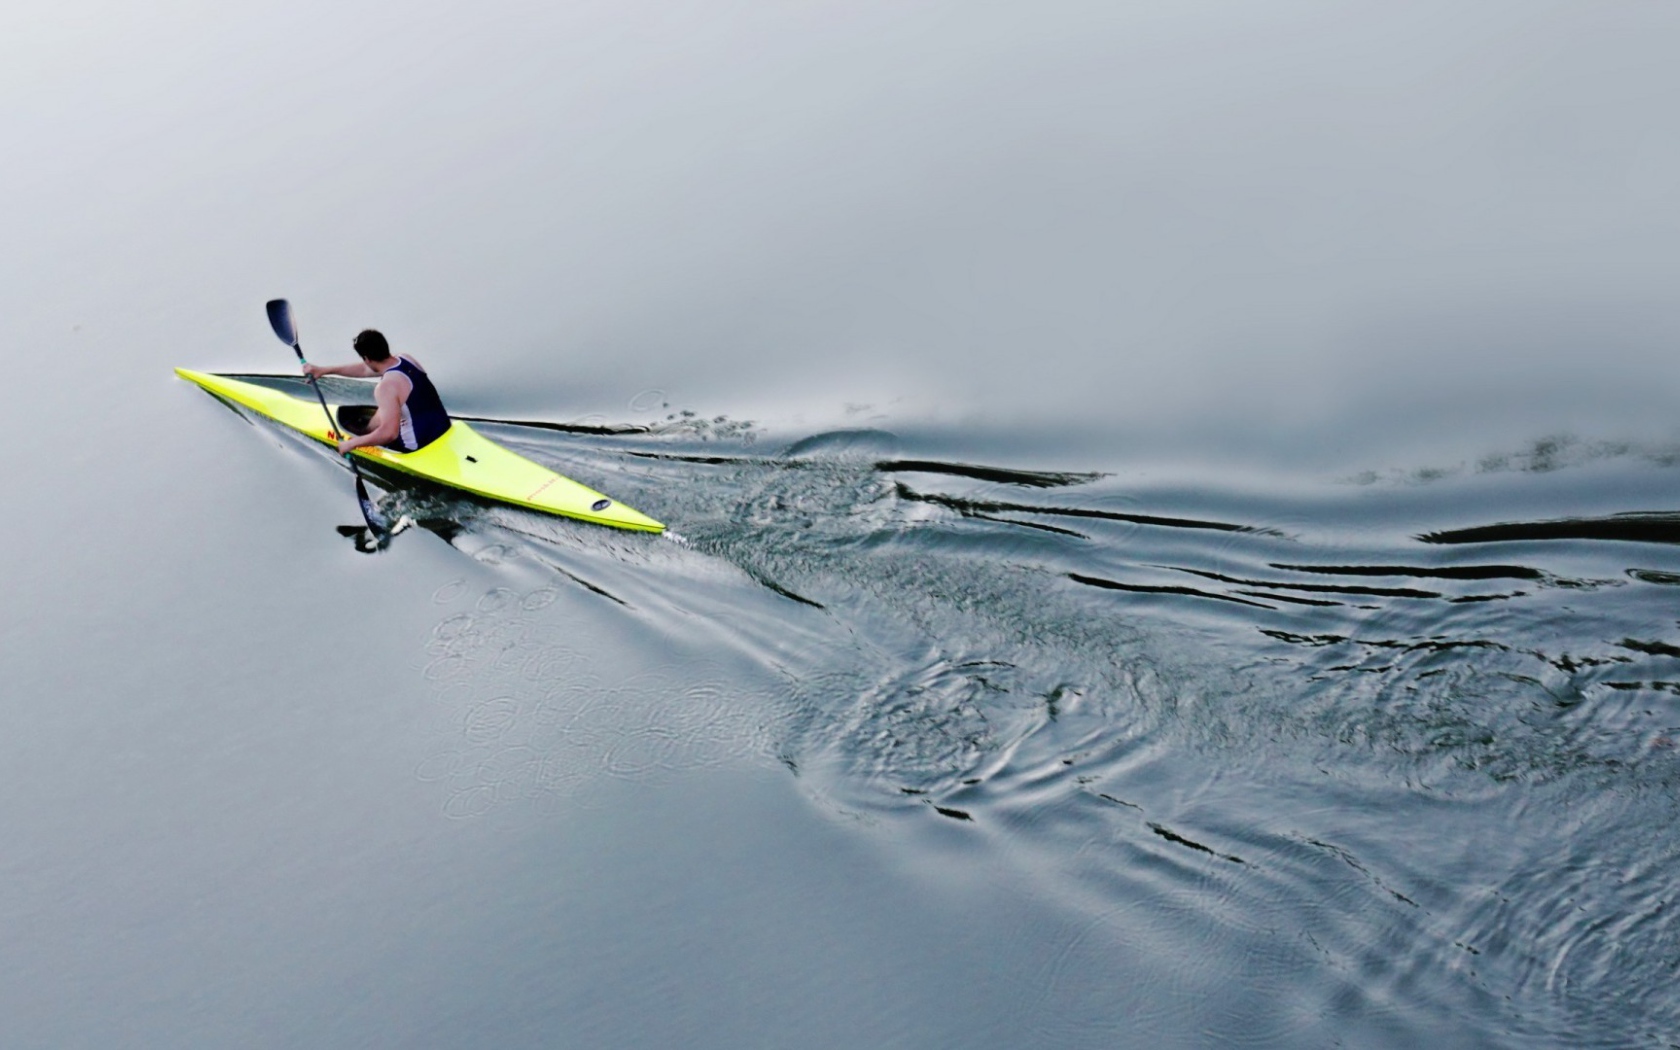 Athlete on a kayak in water